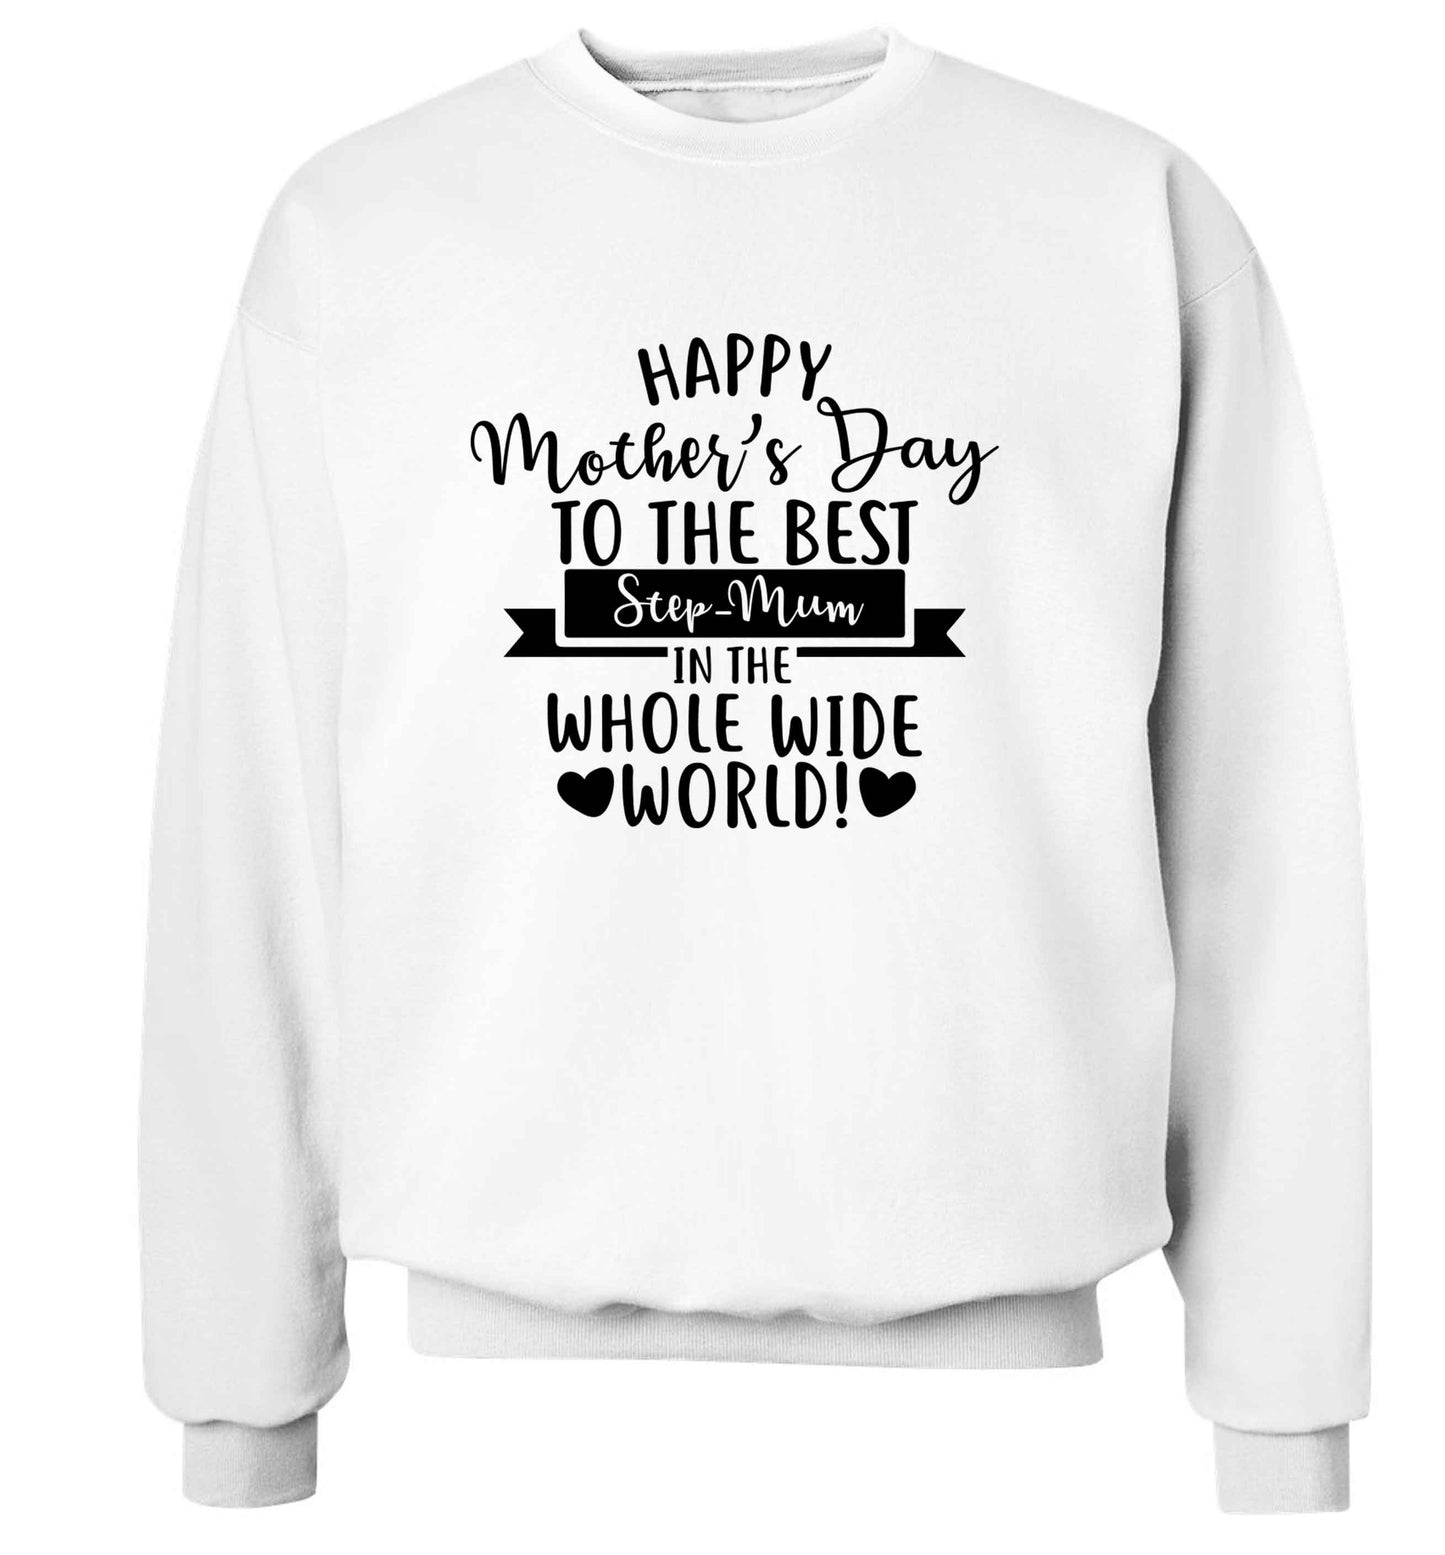 Happy mother's day to the best step-mum in the world adult's unisex white sweater 2XL